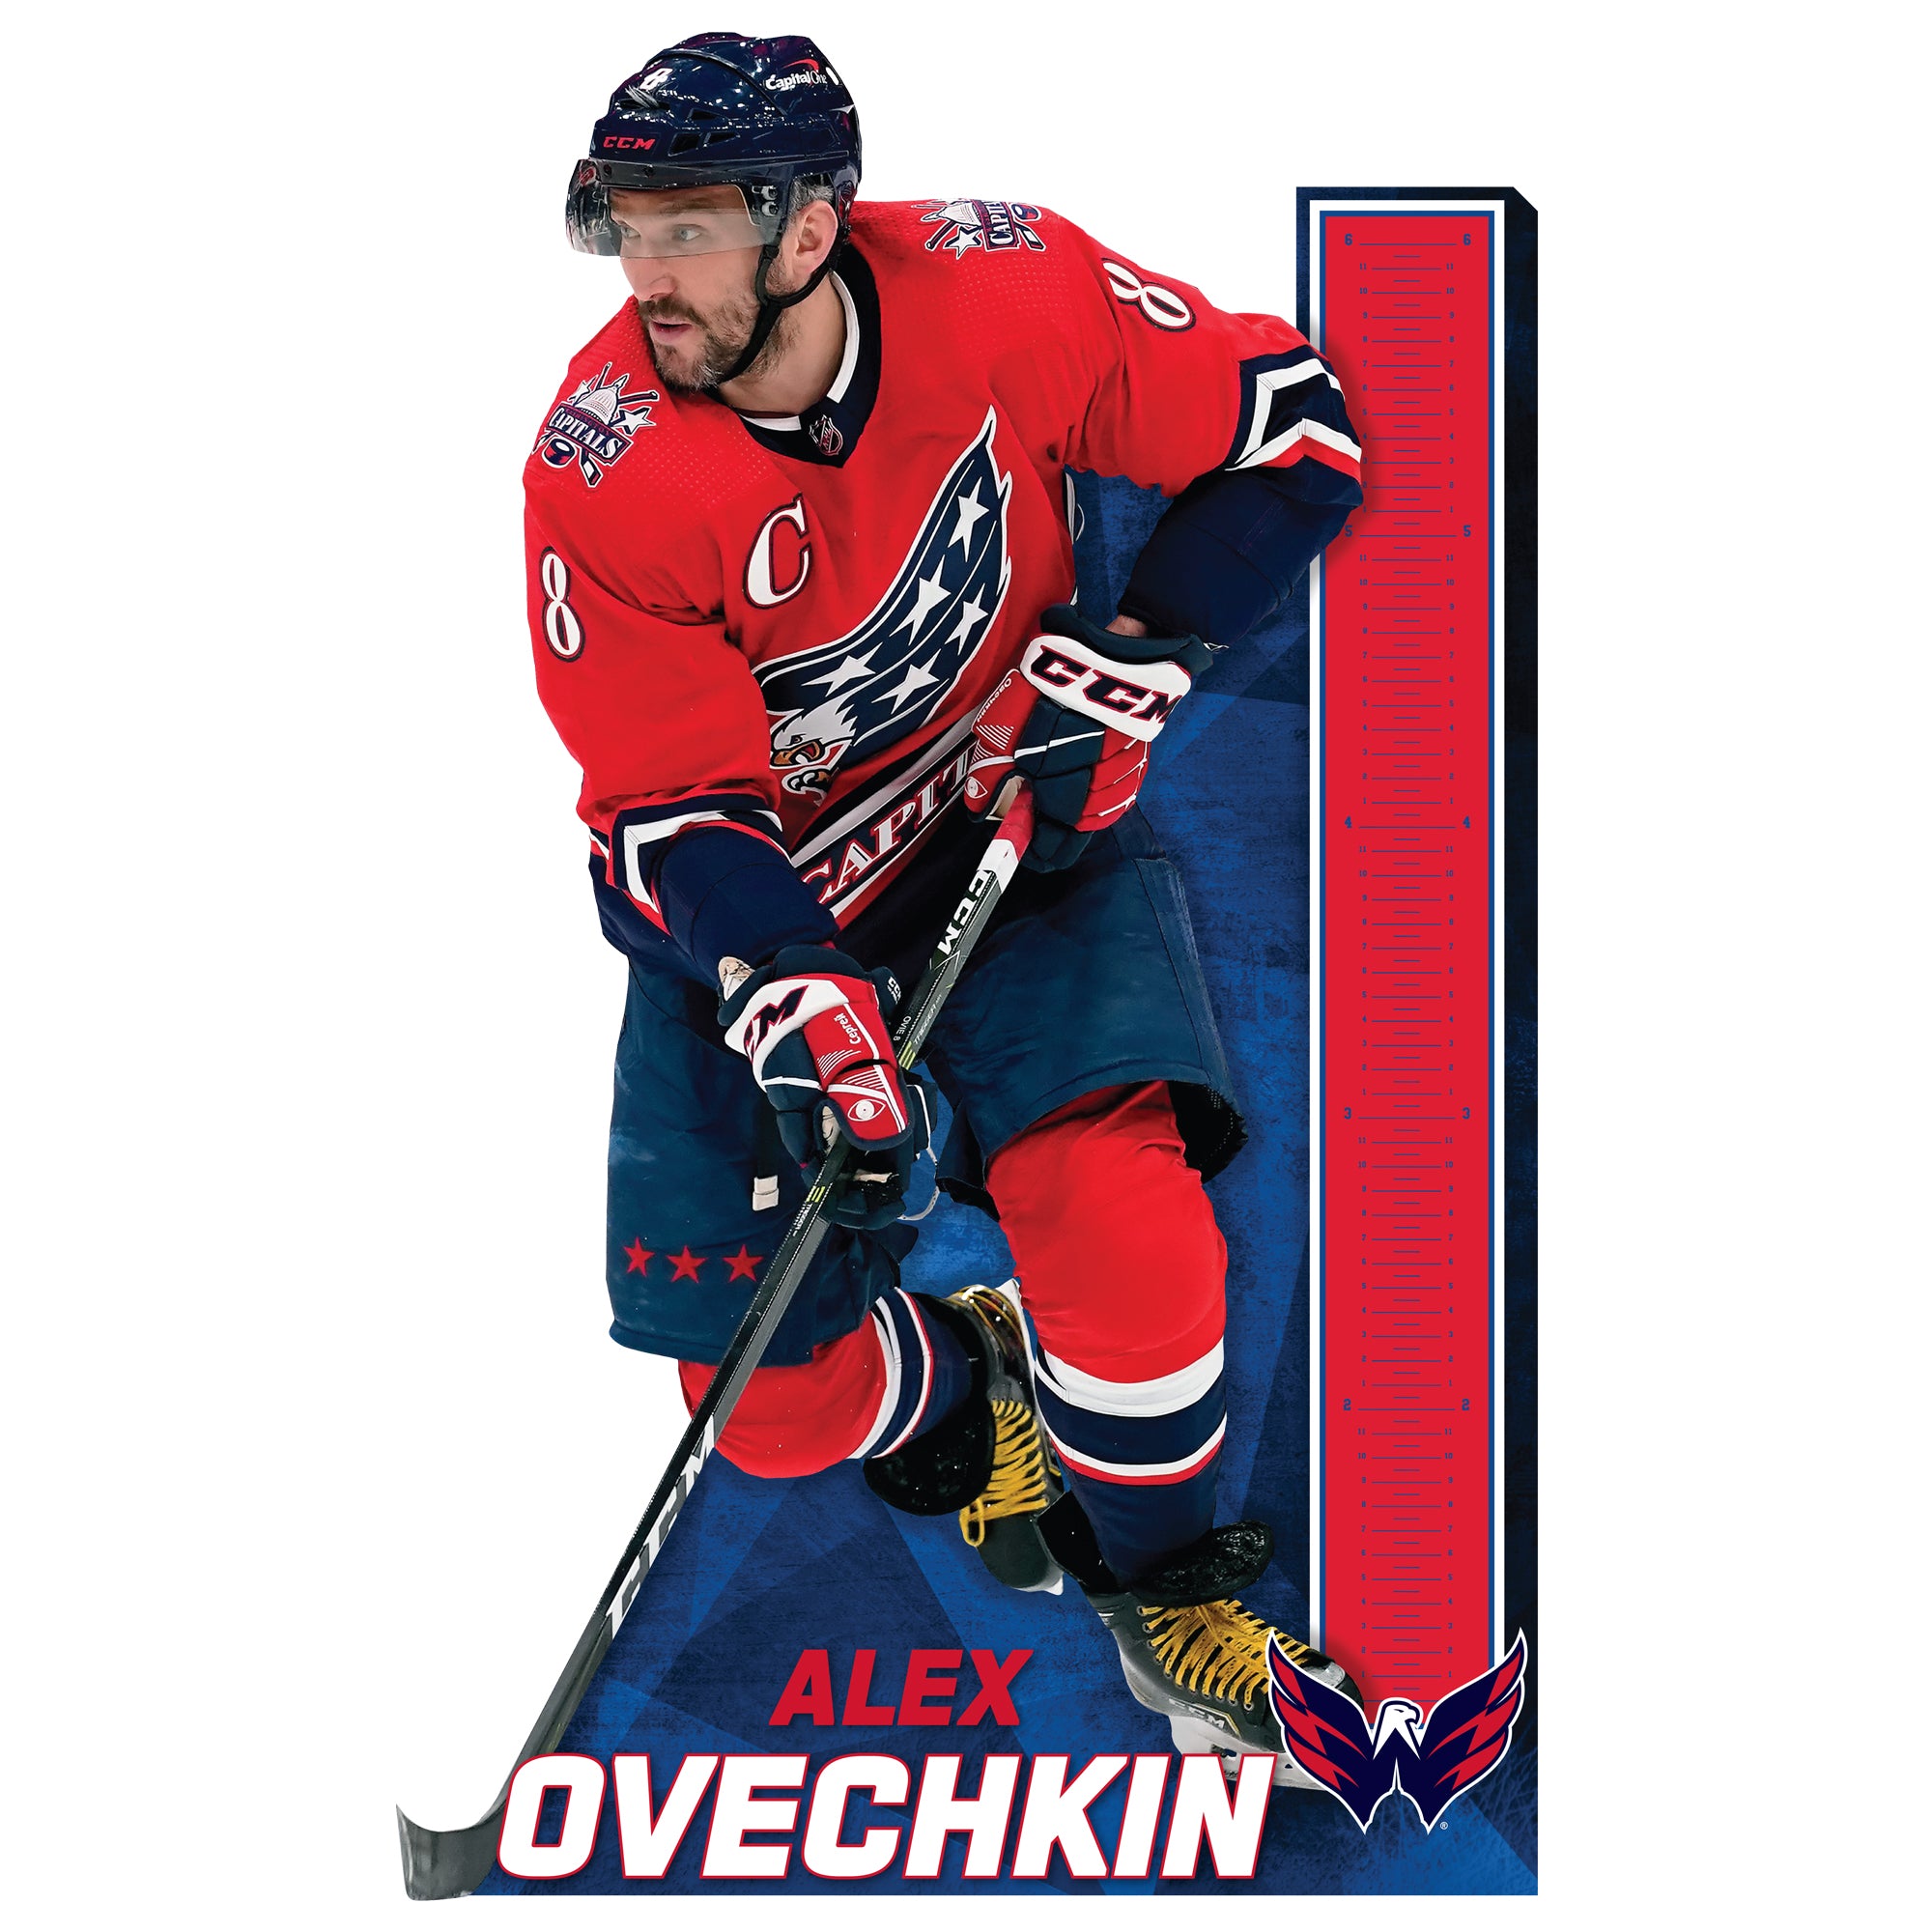 Alex Ovechkin heads in right direction for Caps